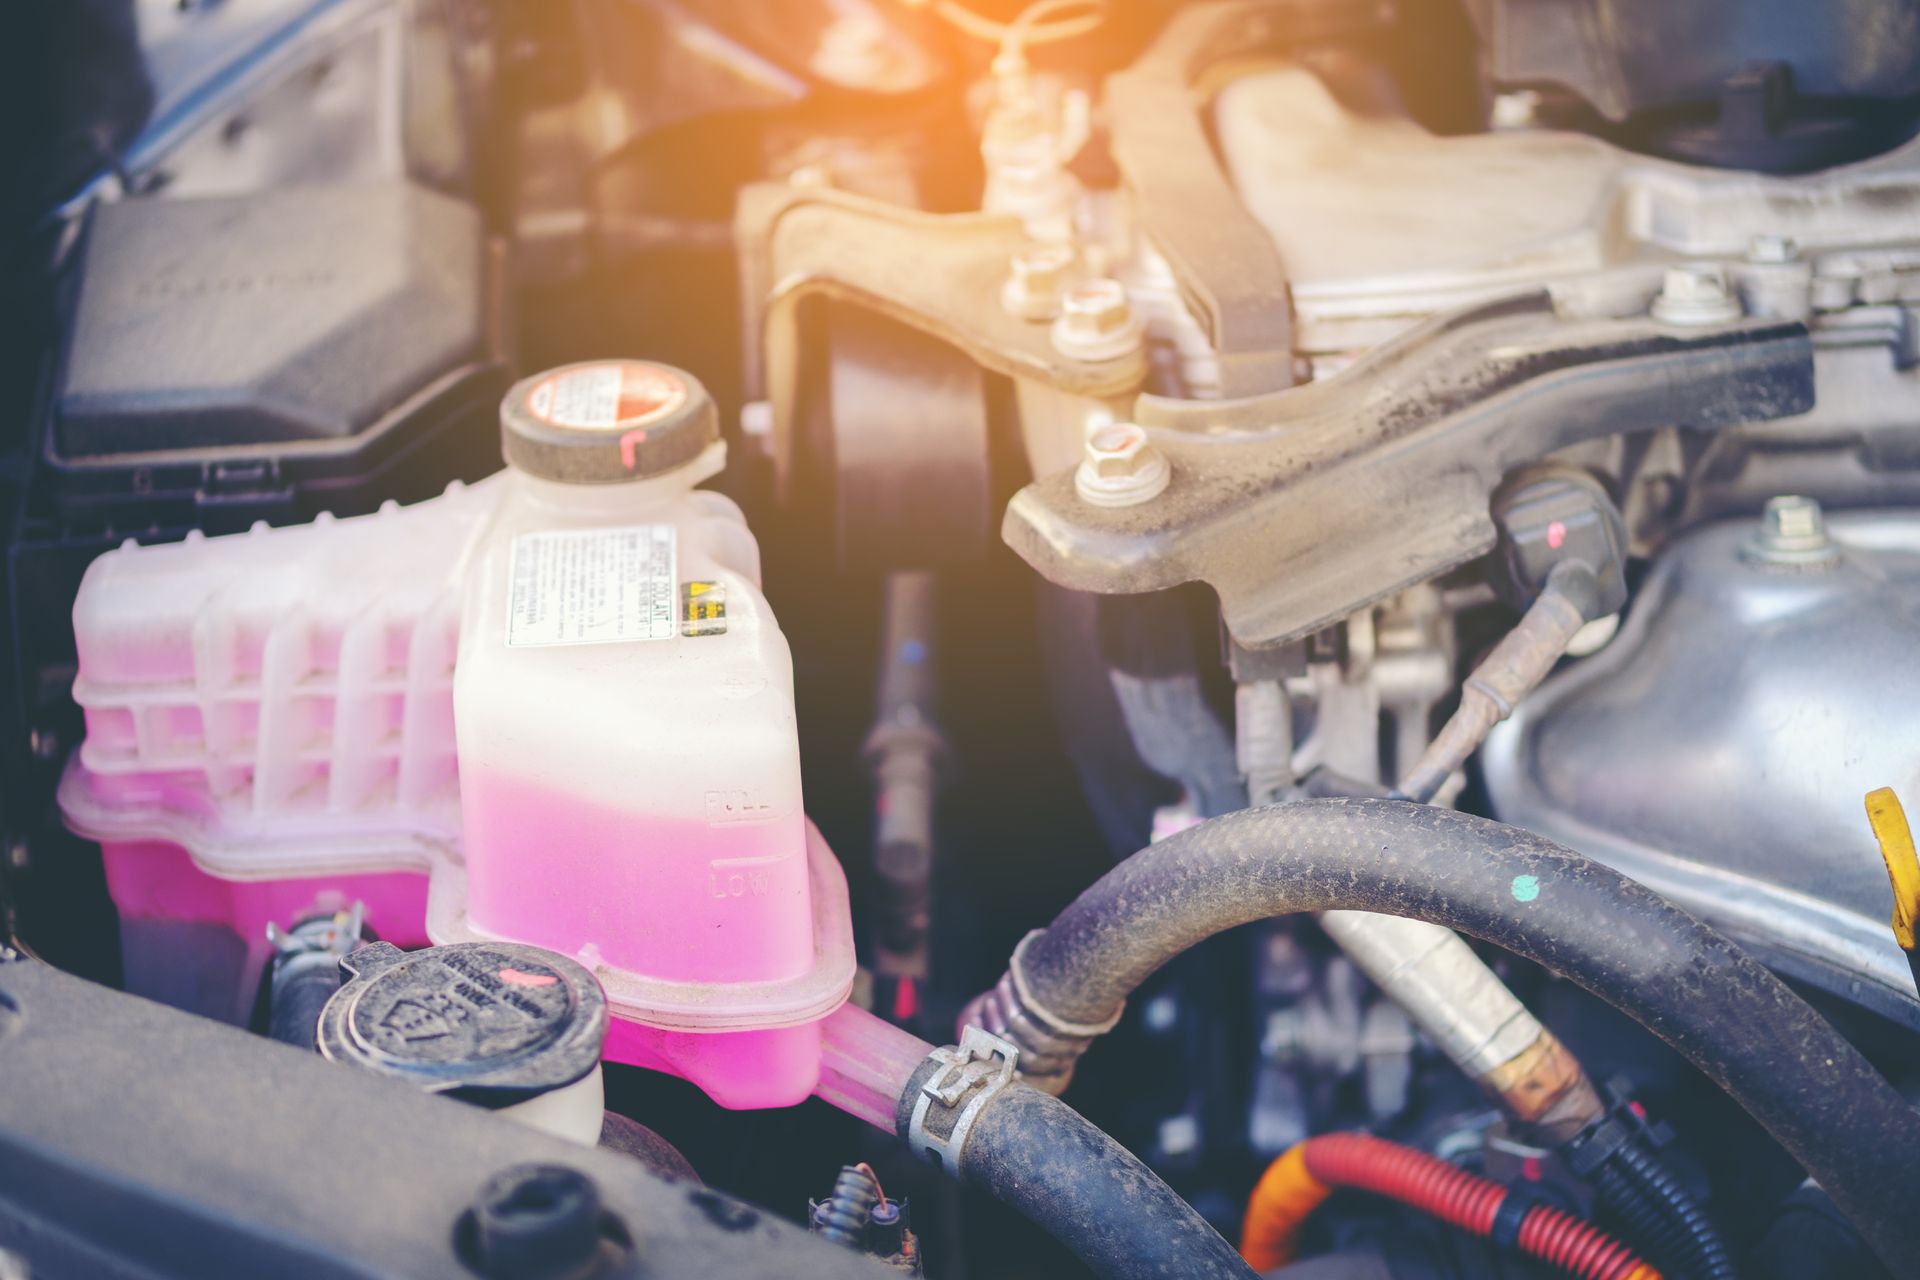 A close up of a car engine with a pink liquid in it.